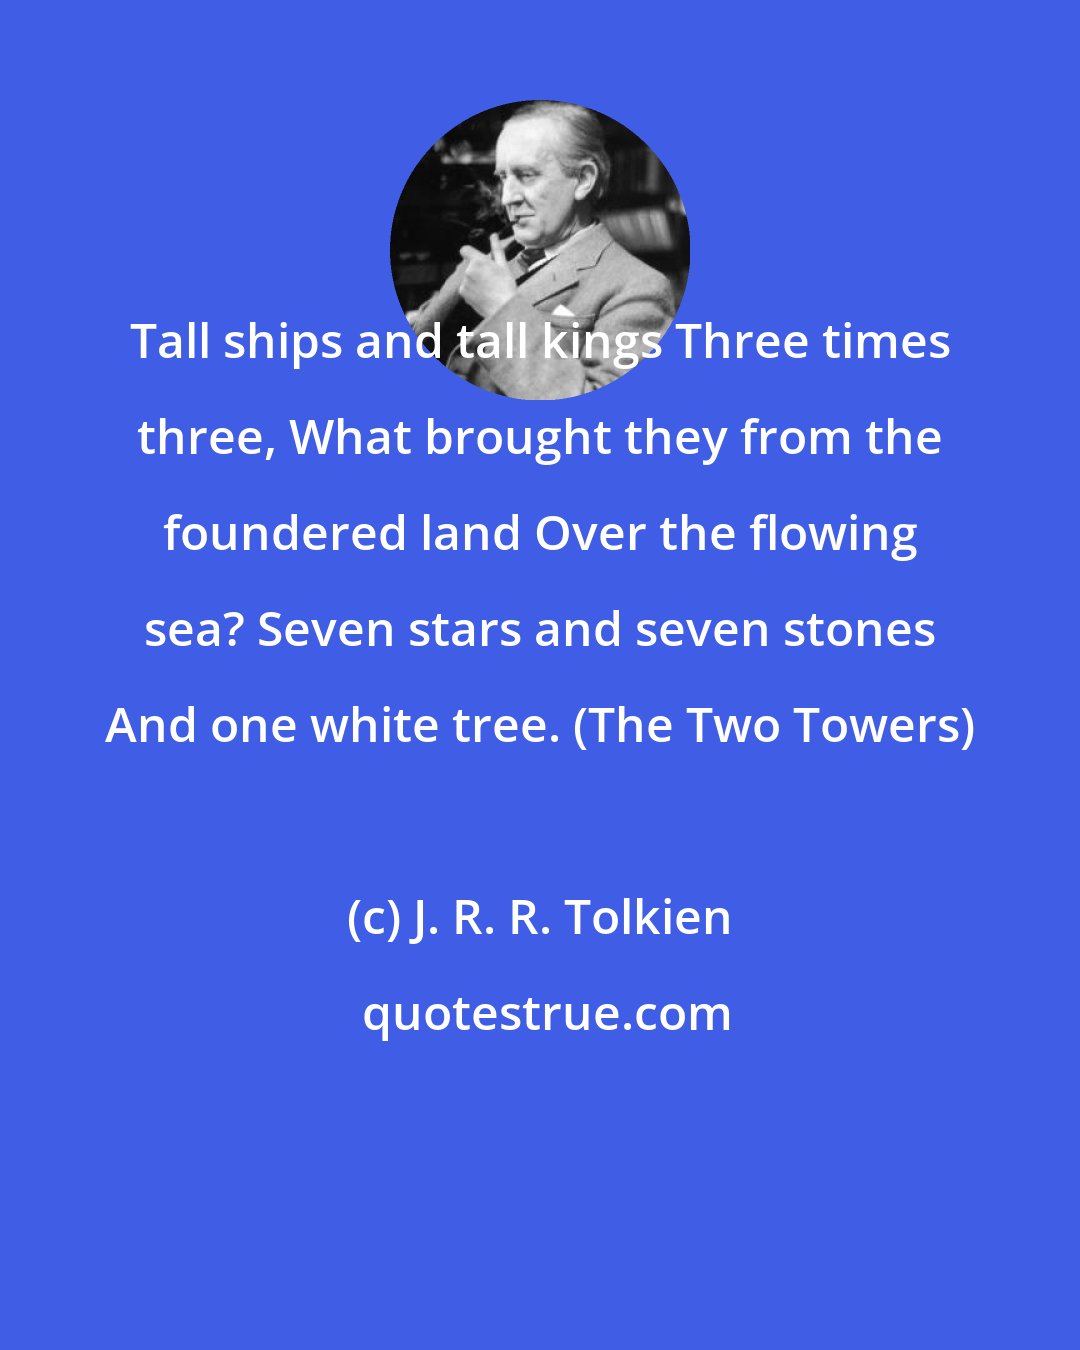 J. R. R. Tolkien: Tall ships and tall kings Three times three, What brought they from the foundered land Over the flowing sea? Seven stars and seven stones And one white tree. (The Two Towers)